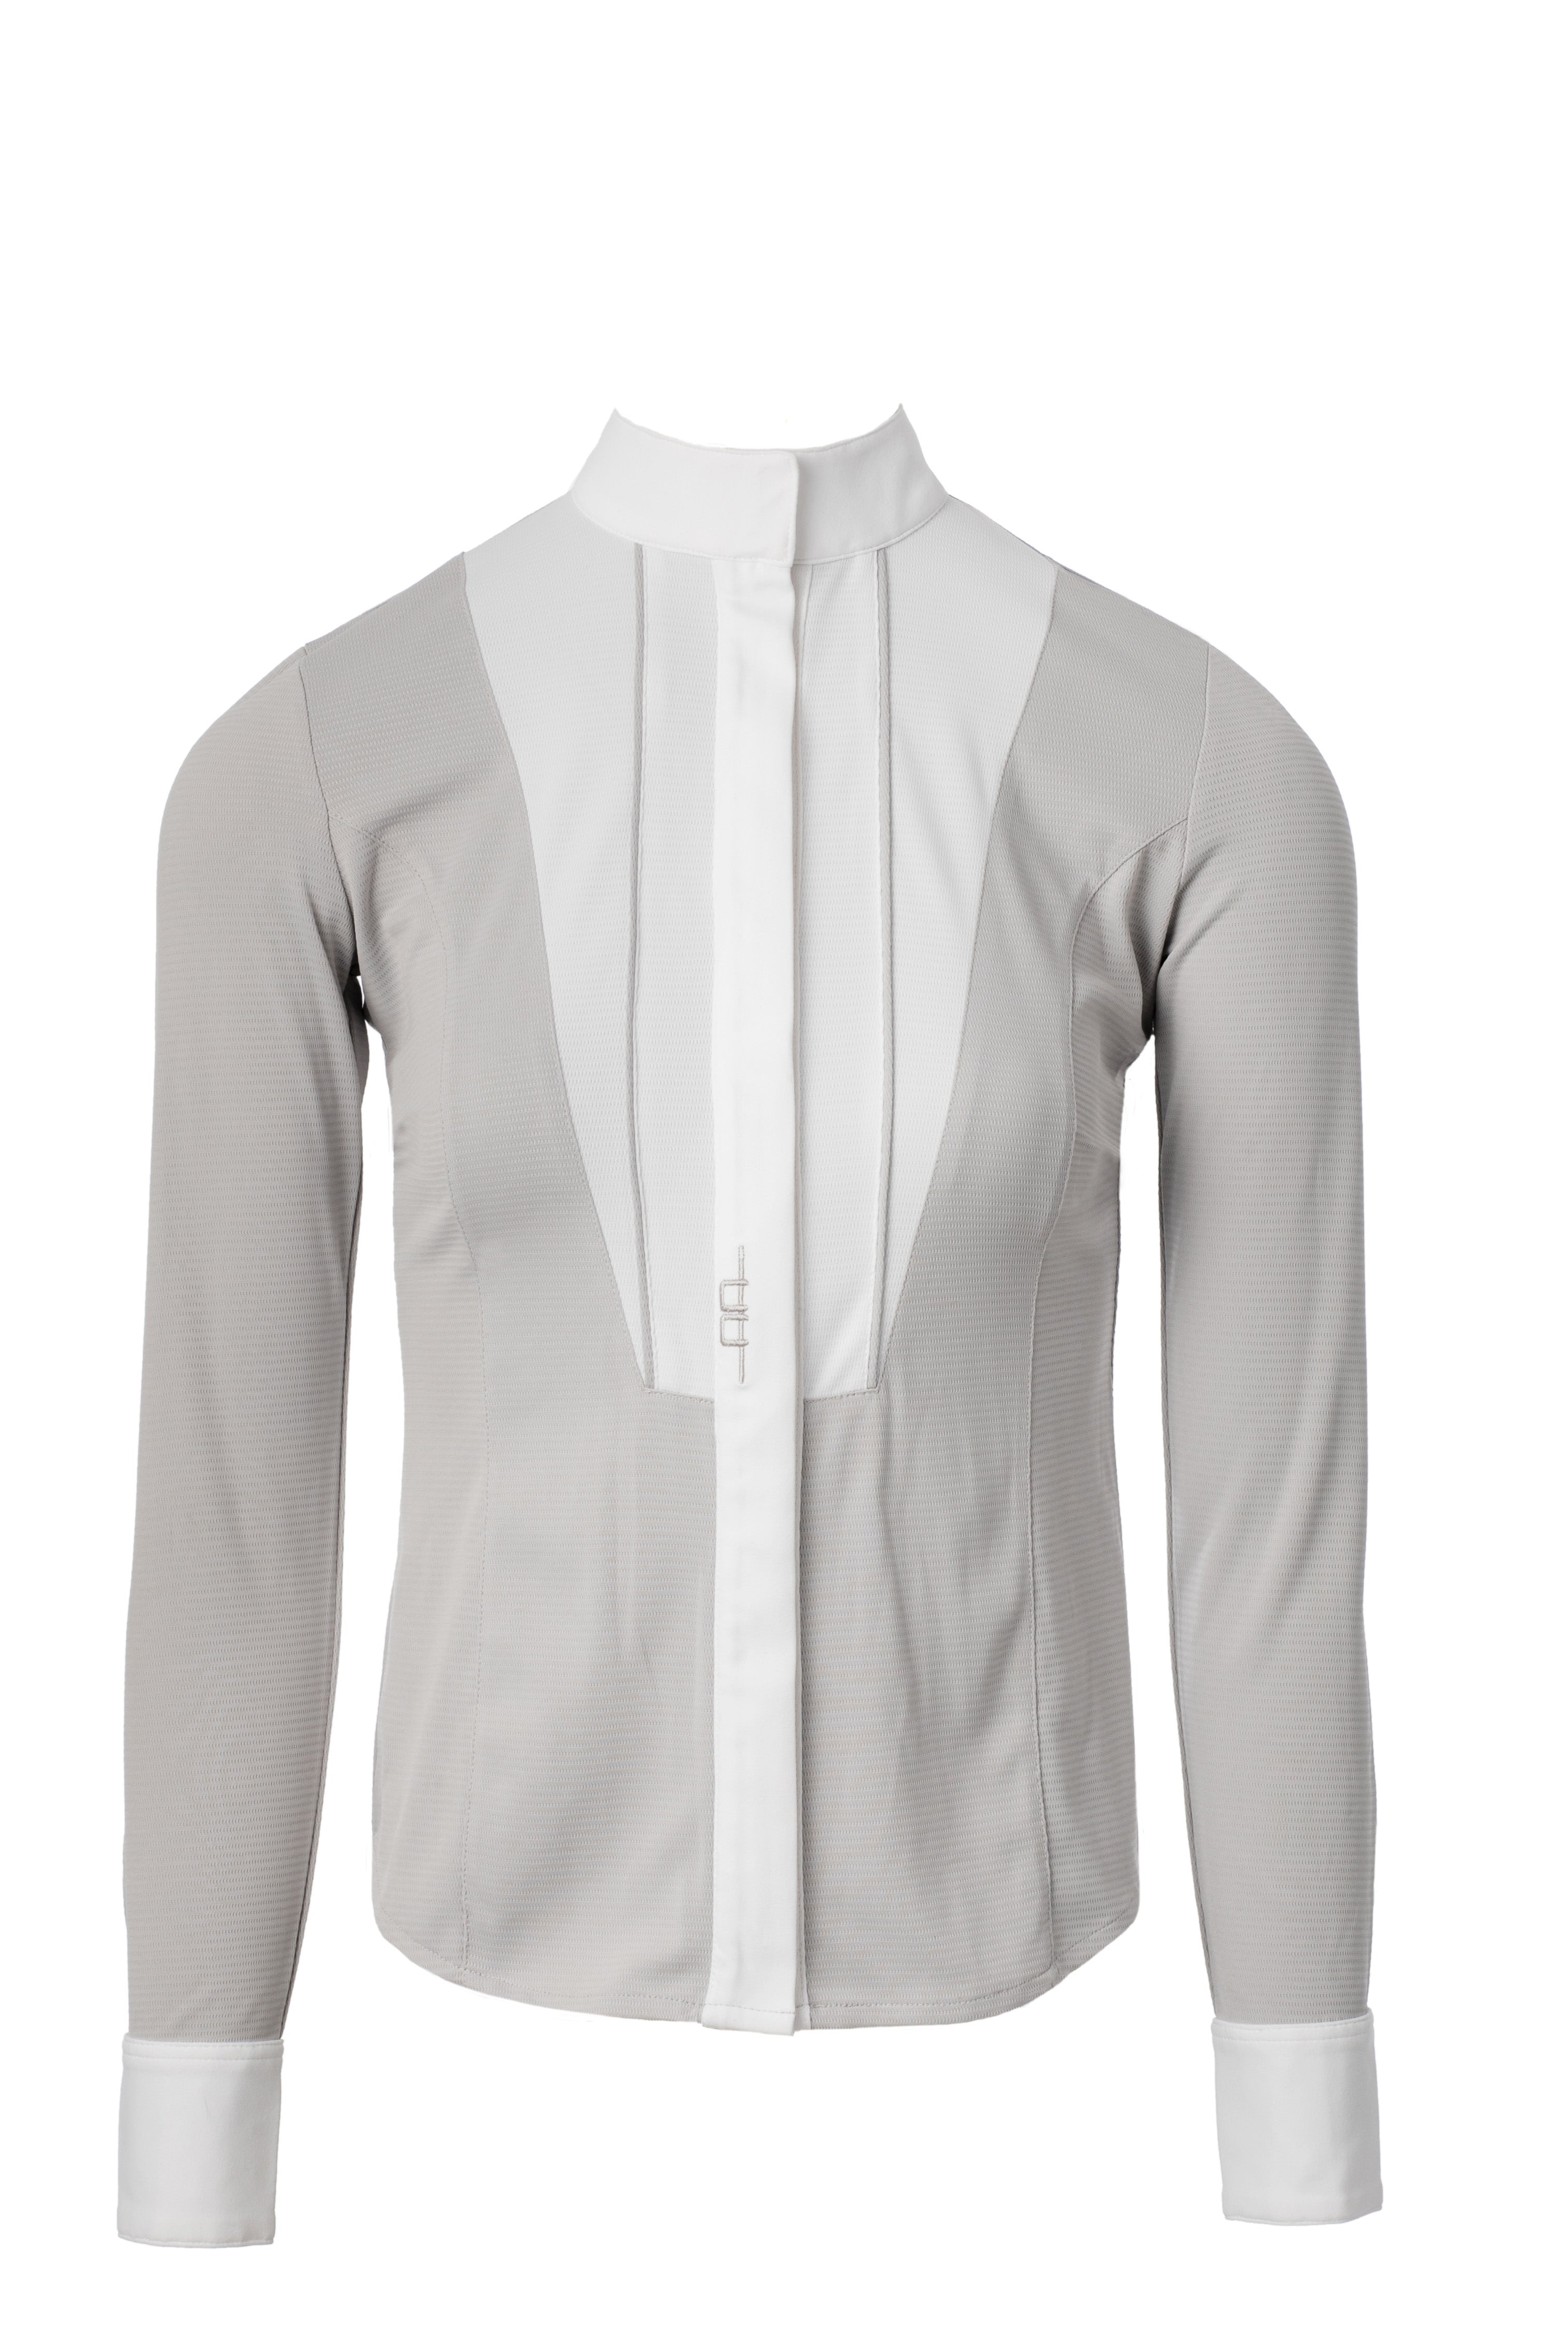 AA Cannes CleanCool Competition Shirt